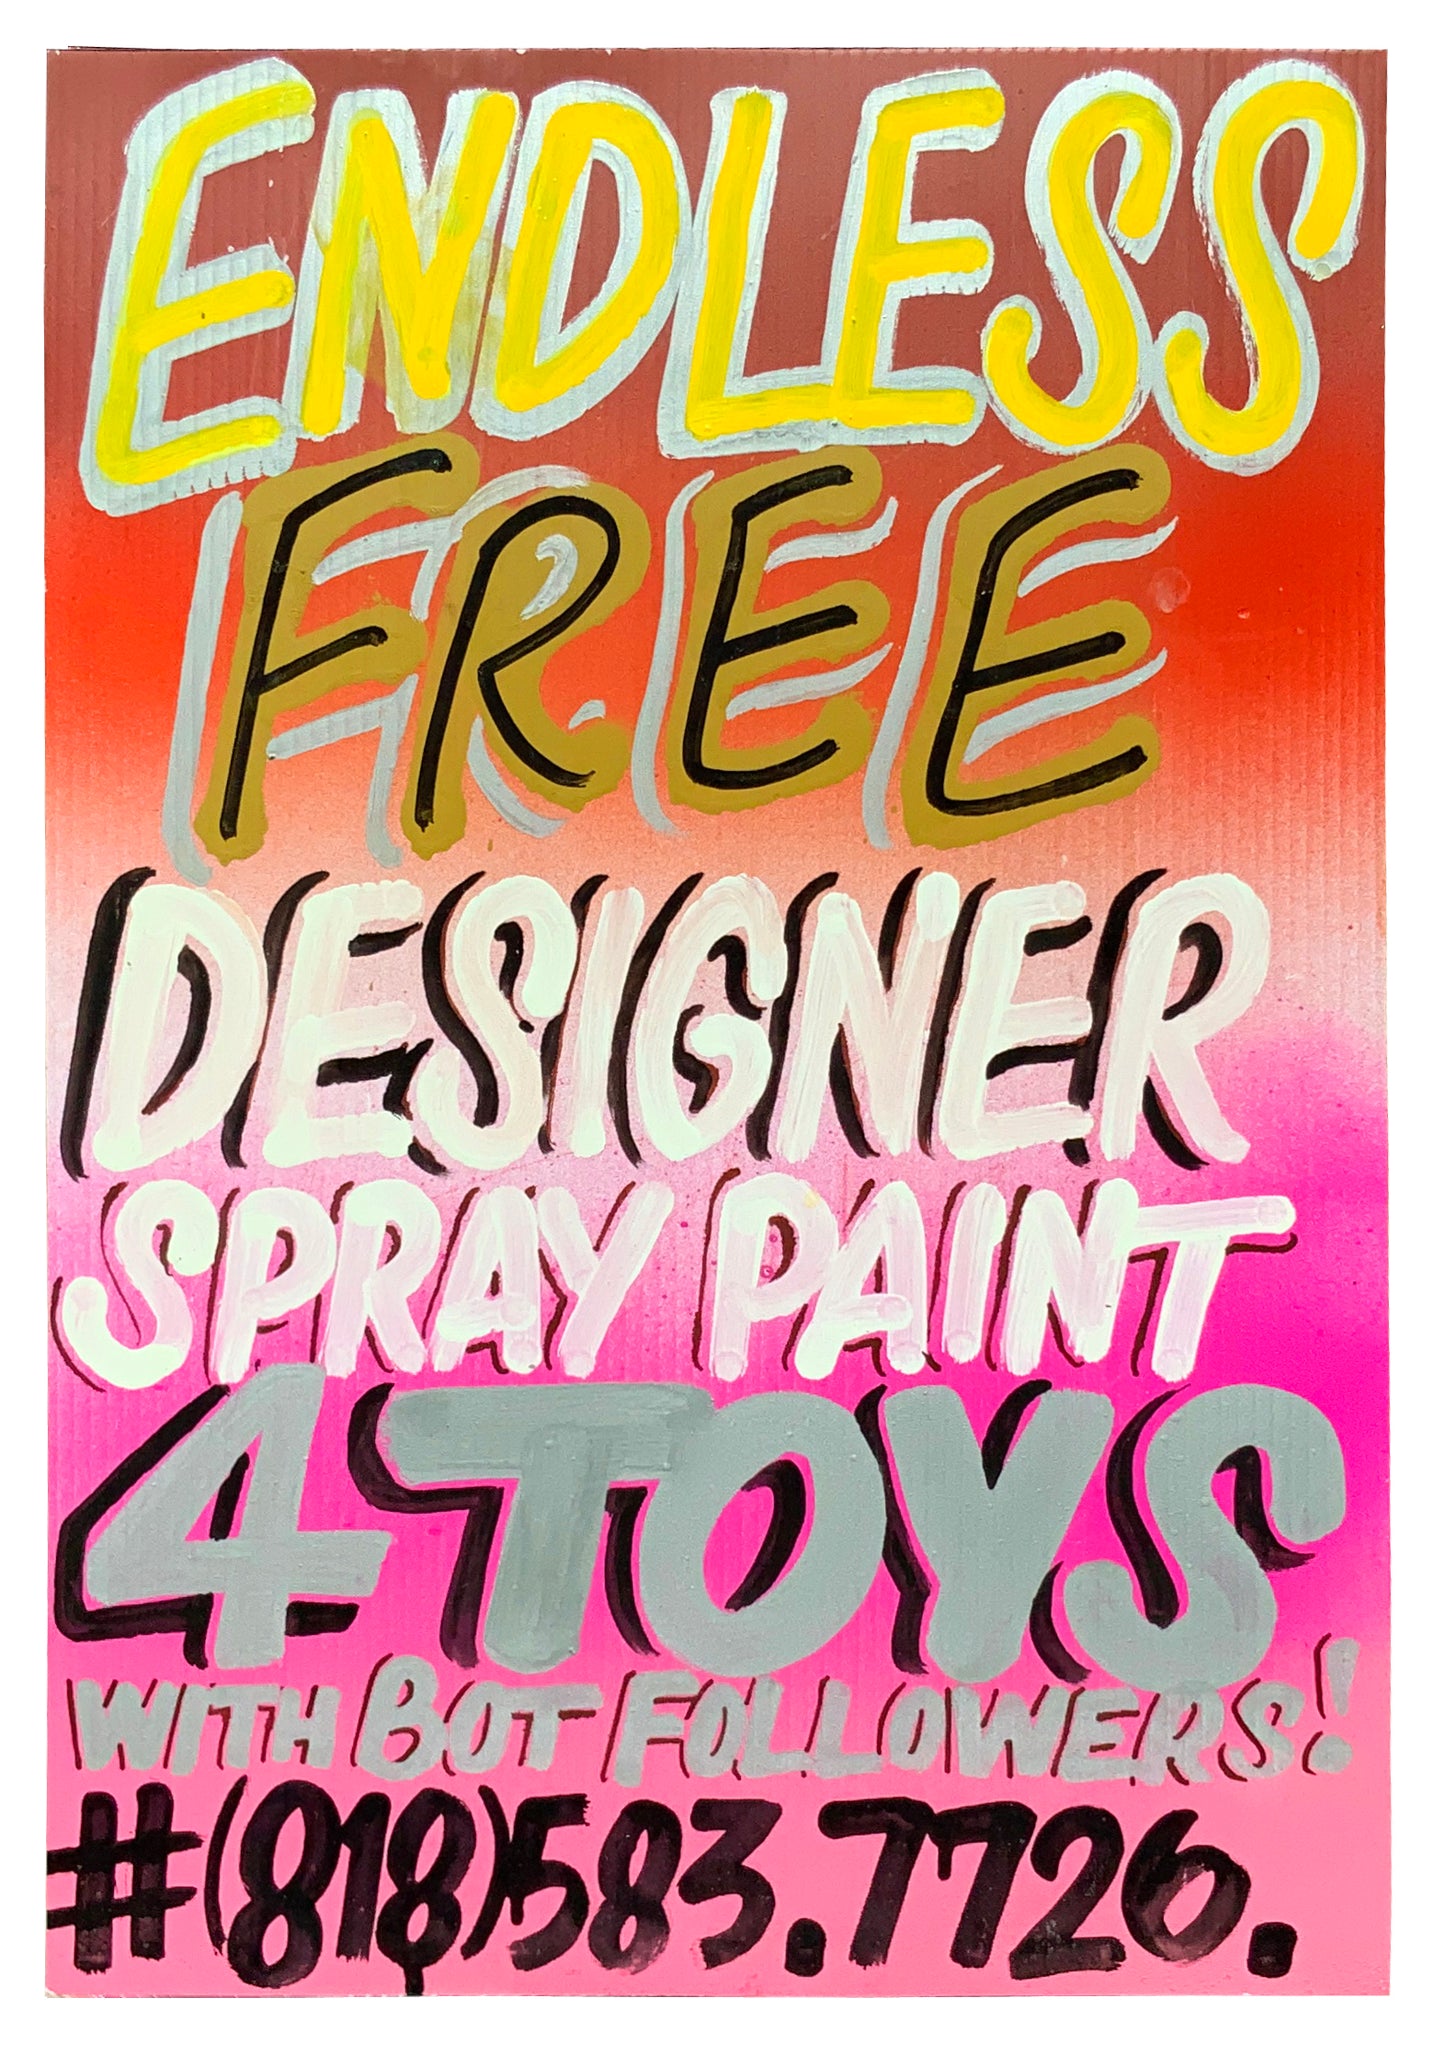 "Endless Free Designer Spray Paint" - 24 x 16 in. - by Cash4 - 2020